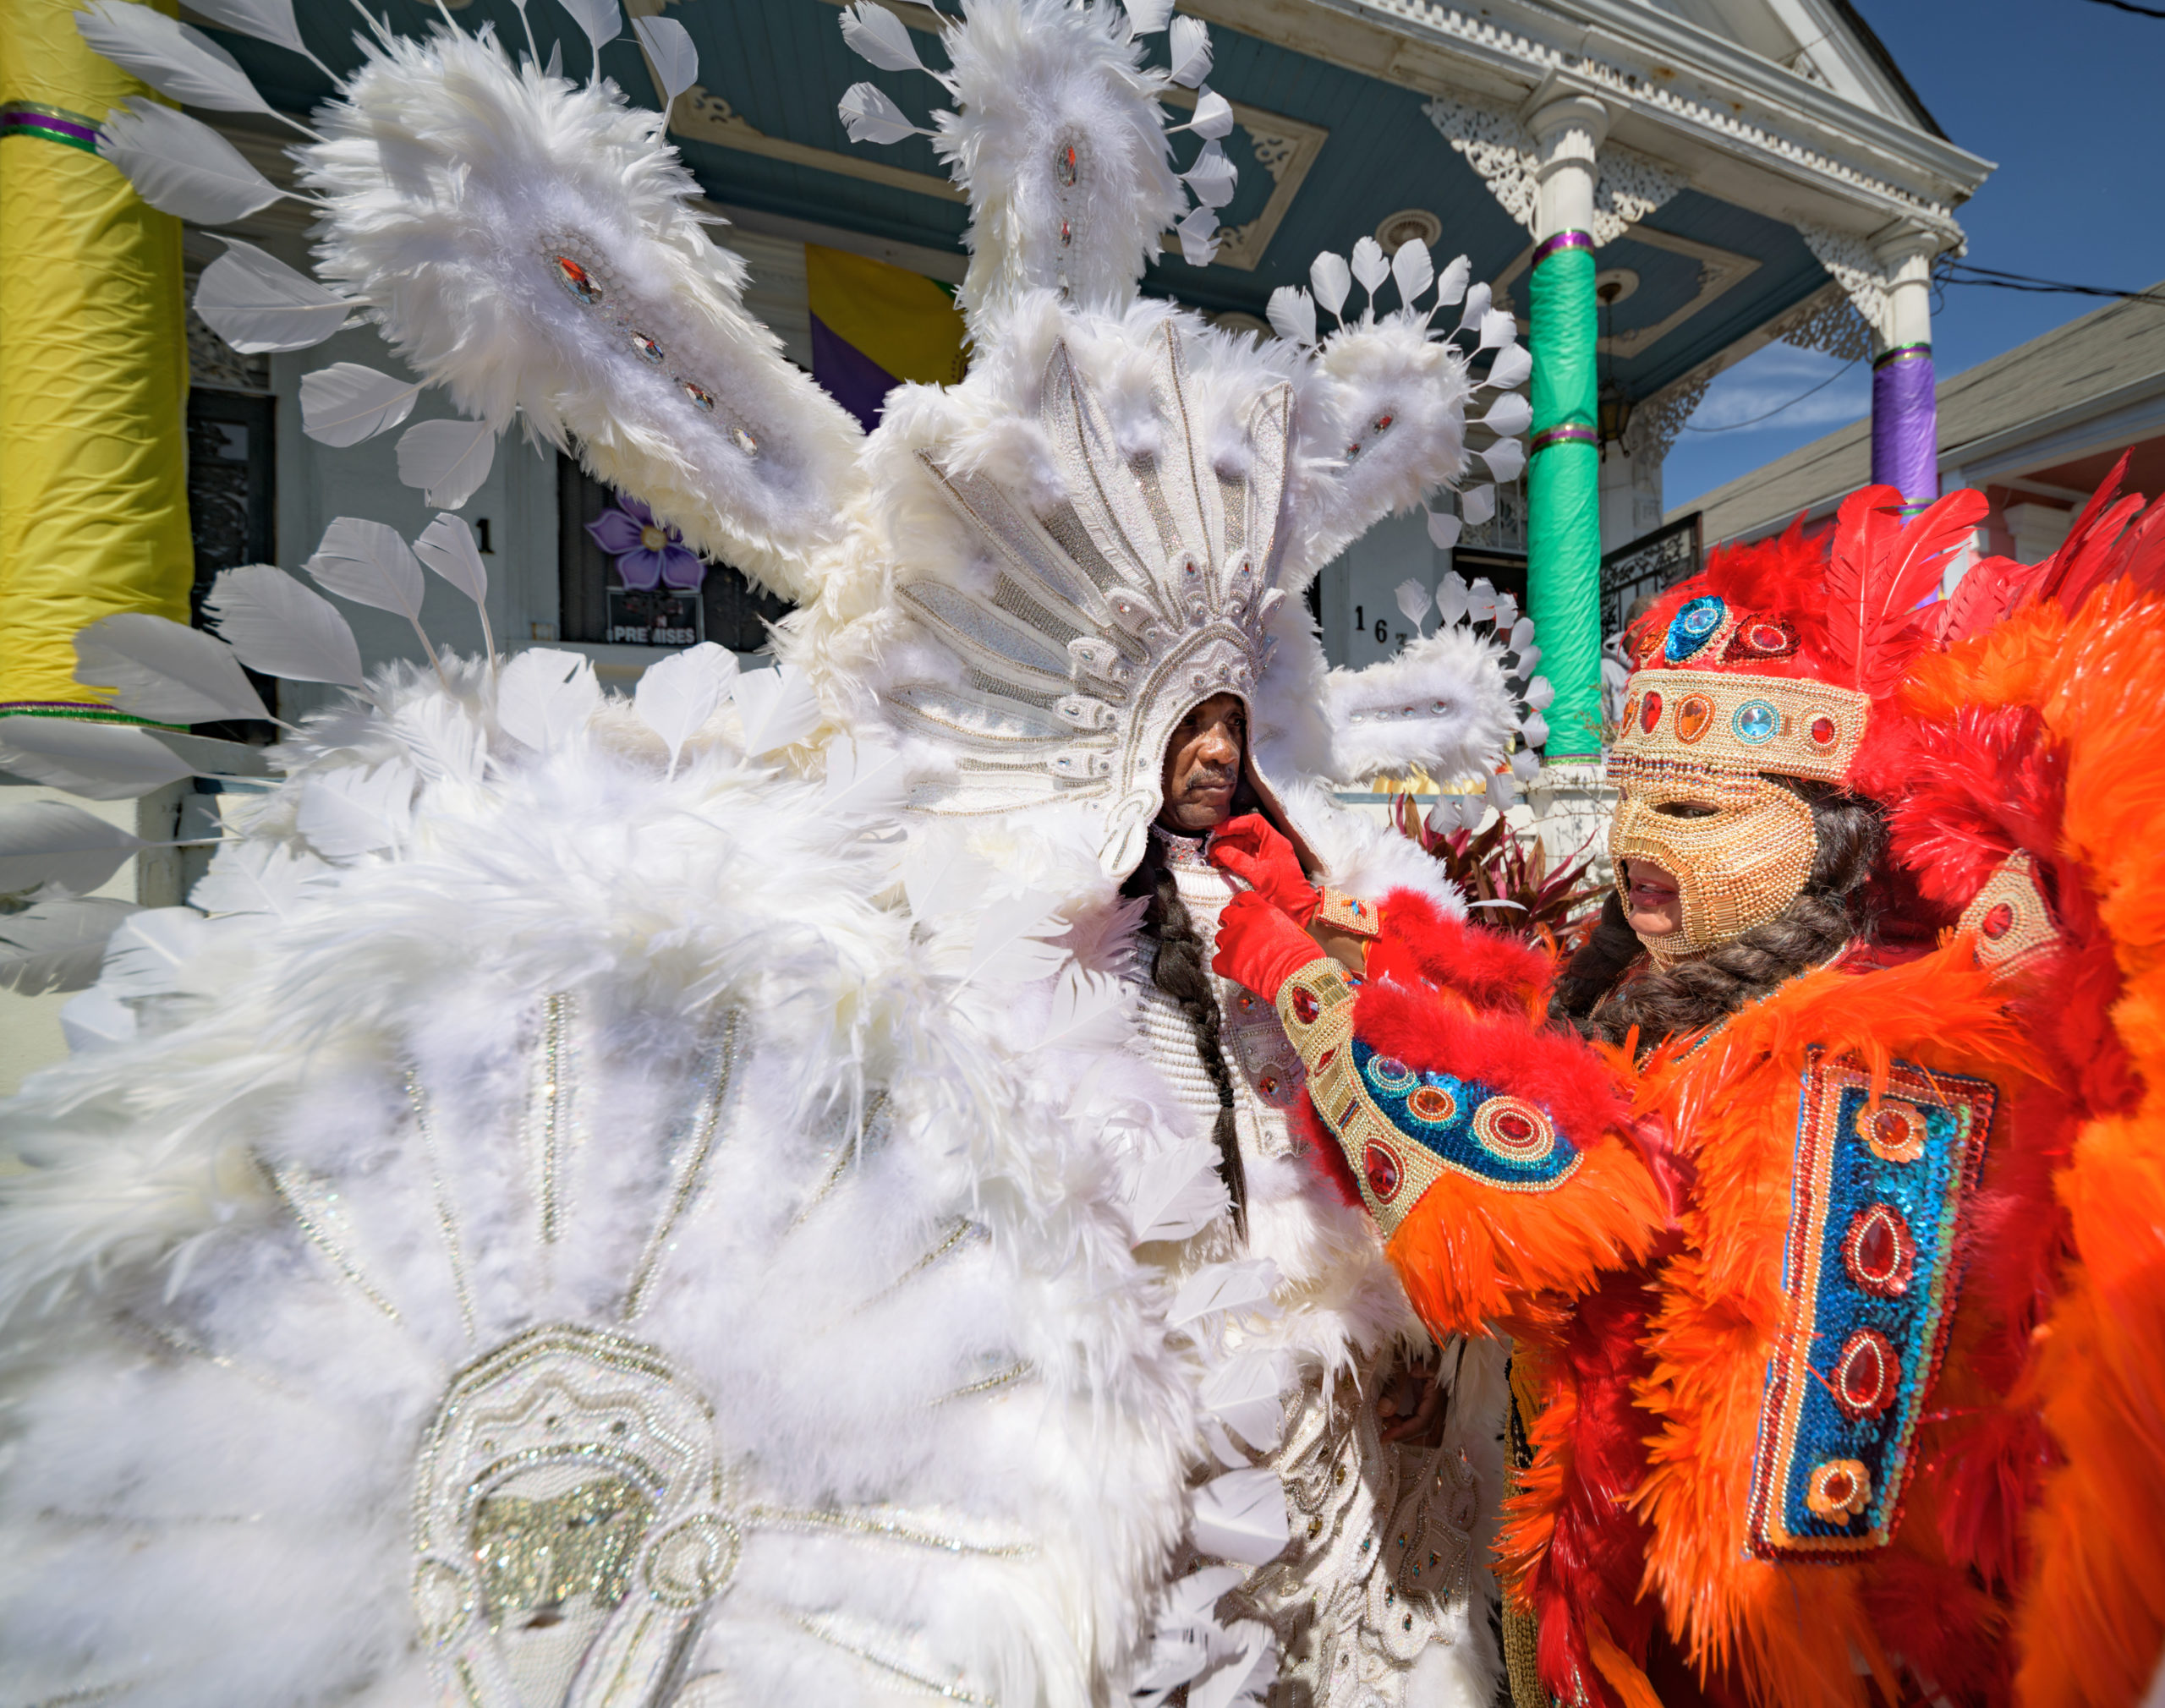 Yellow Pocahontas Queen Dianne Honore, right, helps Big Chief Darryl Montana put on his suit for Mardi Gras, March 1, 2022 in New Orleans in front of the home of Darryl’s father, Big Chief “Tootie” Montana. Photo by Matthew Hinton